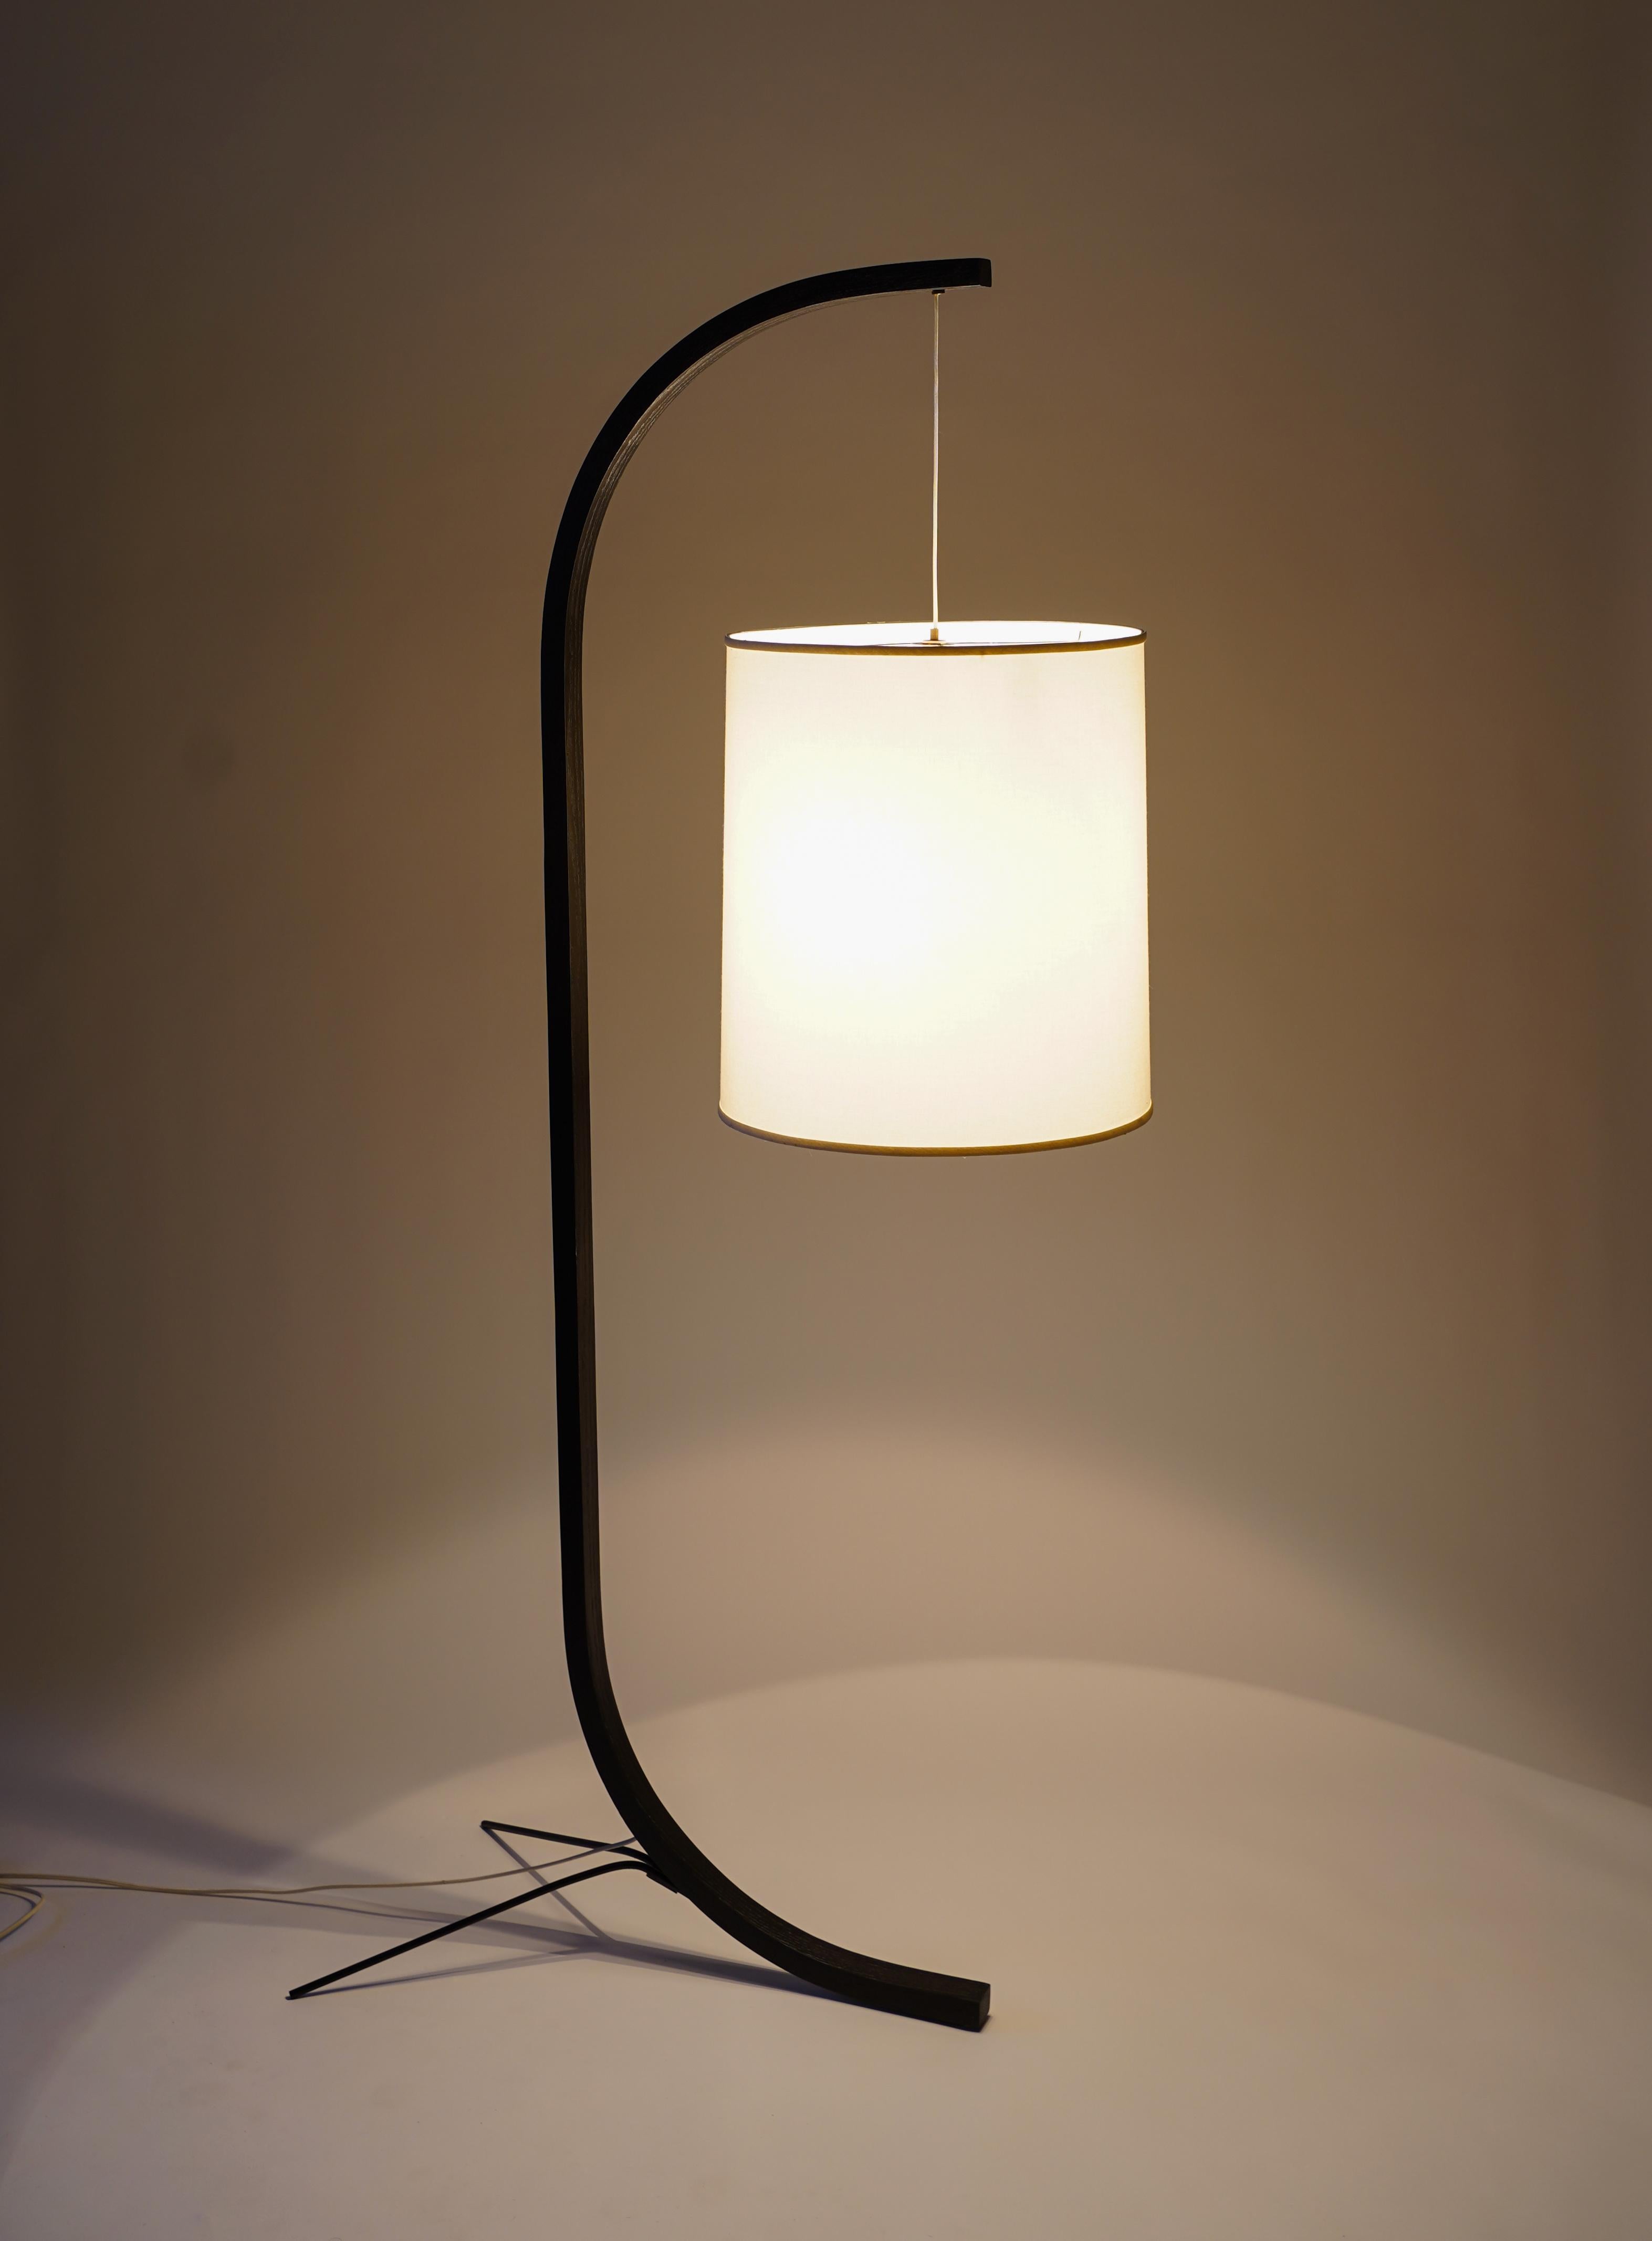 Slender Minimalist curved floor lamp made with oak, steel, and cloth lampshade. Powered by a traditional incandescent bulb, the lamp provides a 360° warm glow. This version of the Pion lamp is offered in a black finish. The lamp can receive two